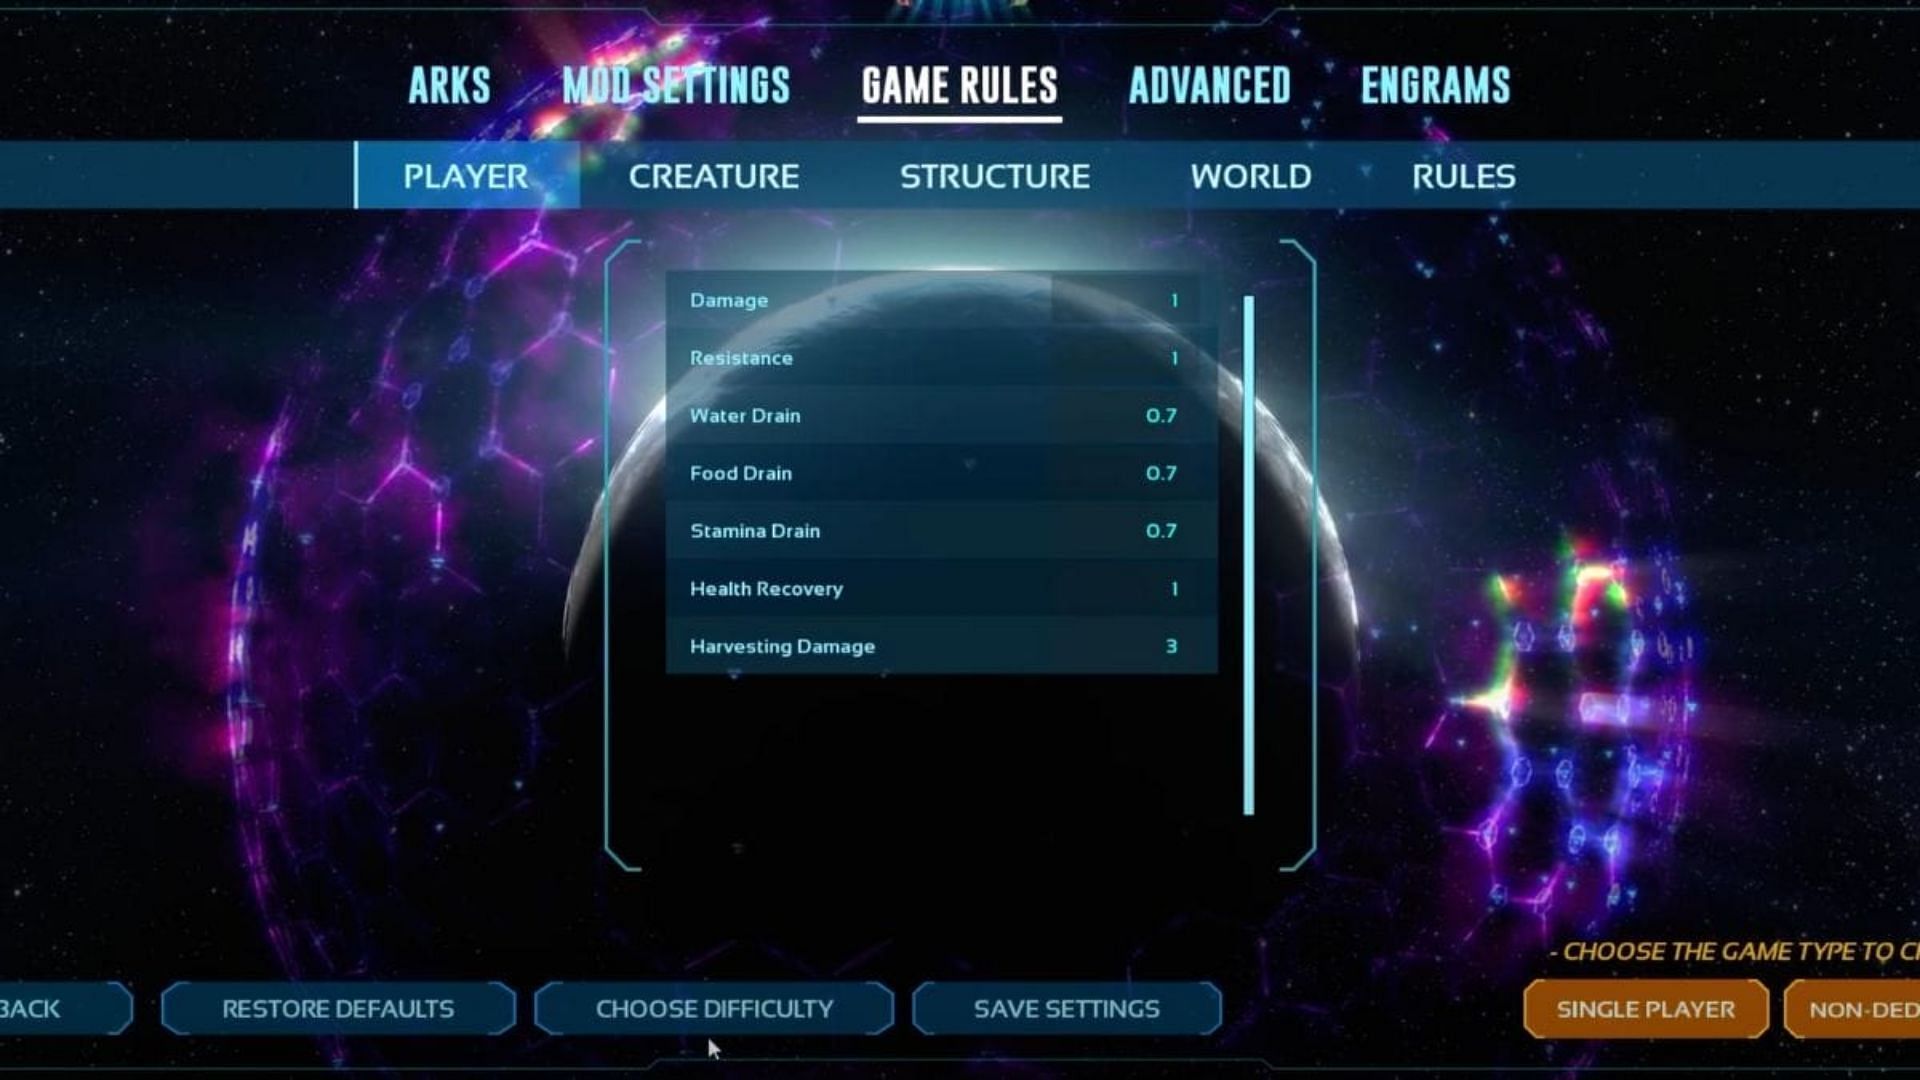 Game rules settings can make the gameplay easy or difficult depending on how you set them (Image via Studio Wildcard)